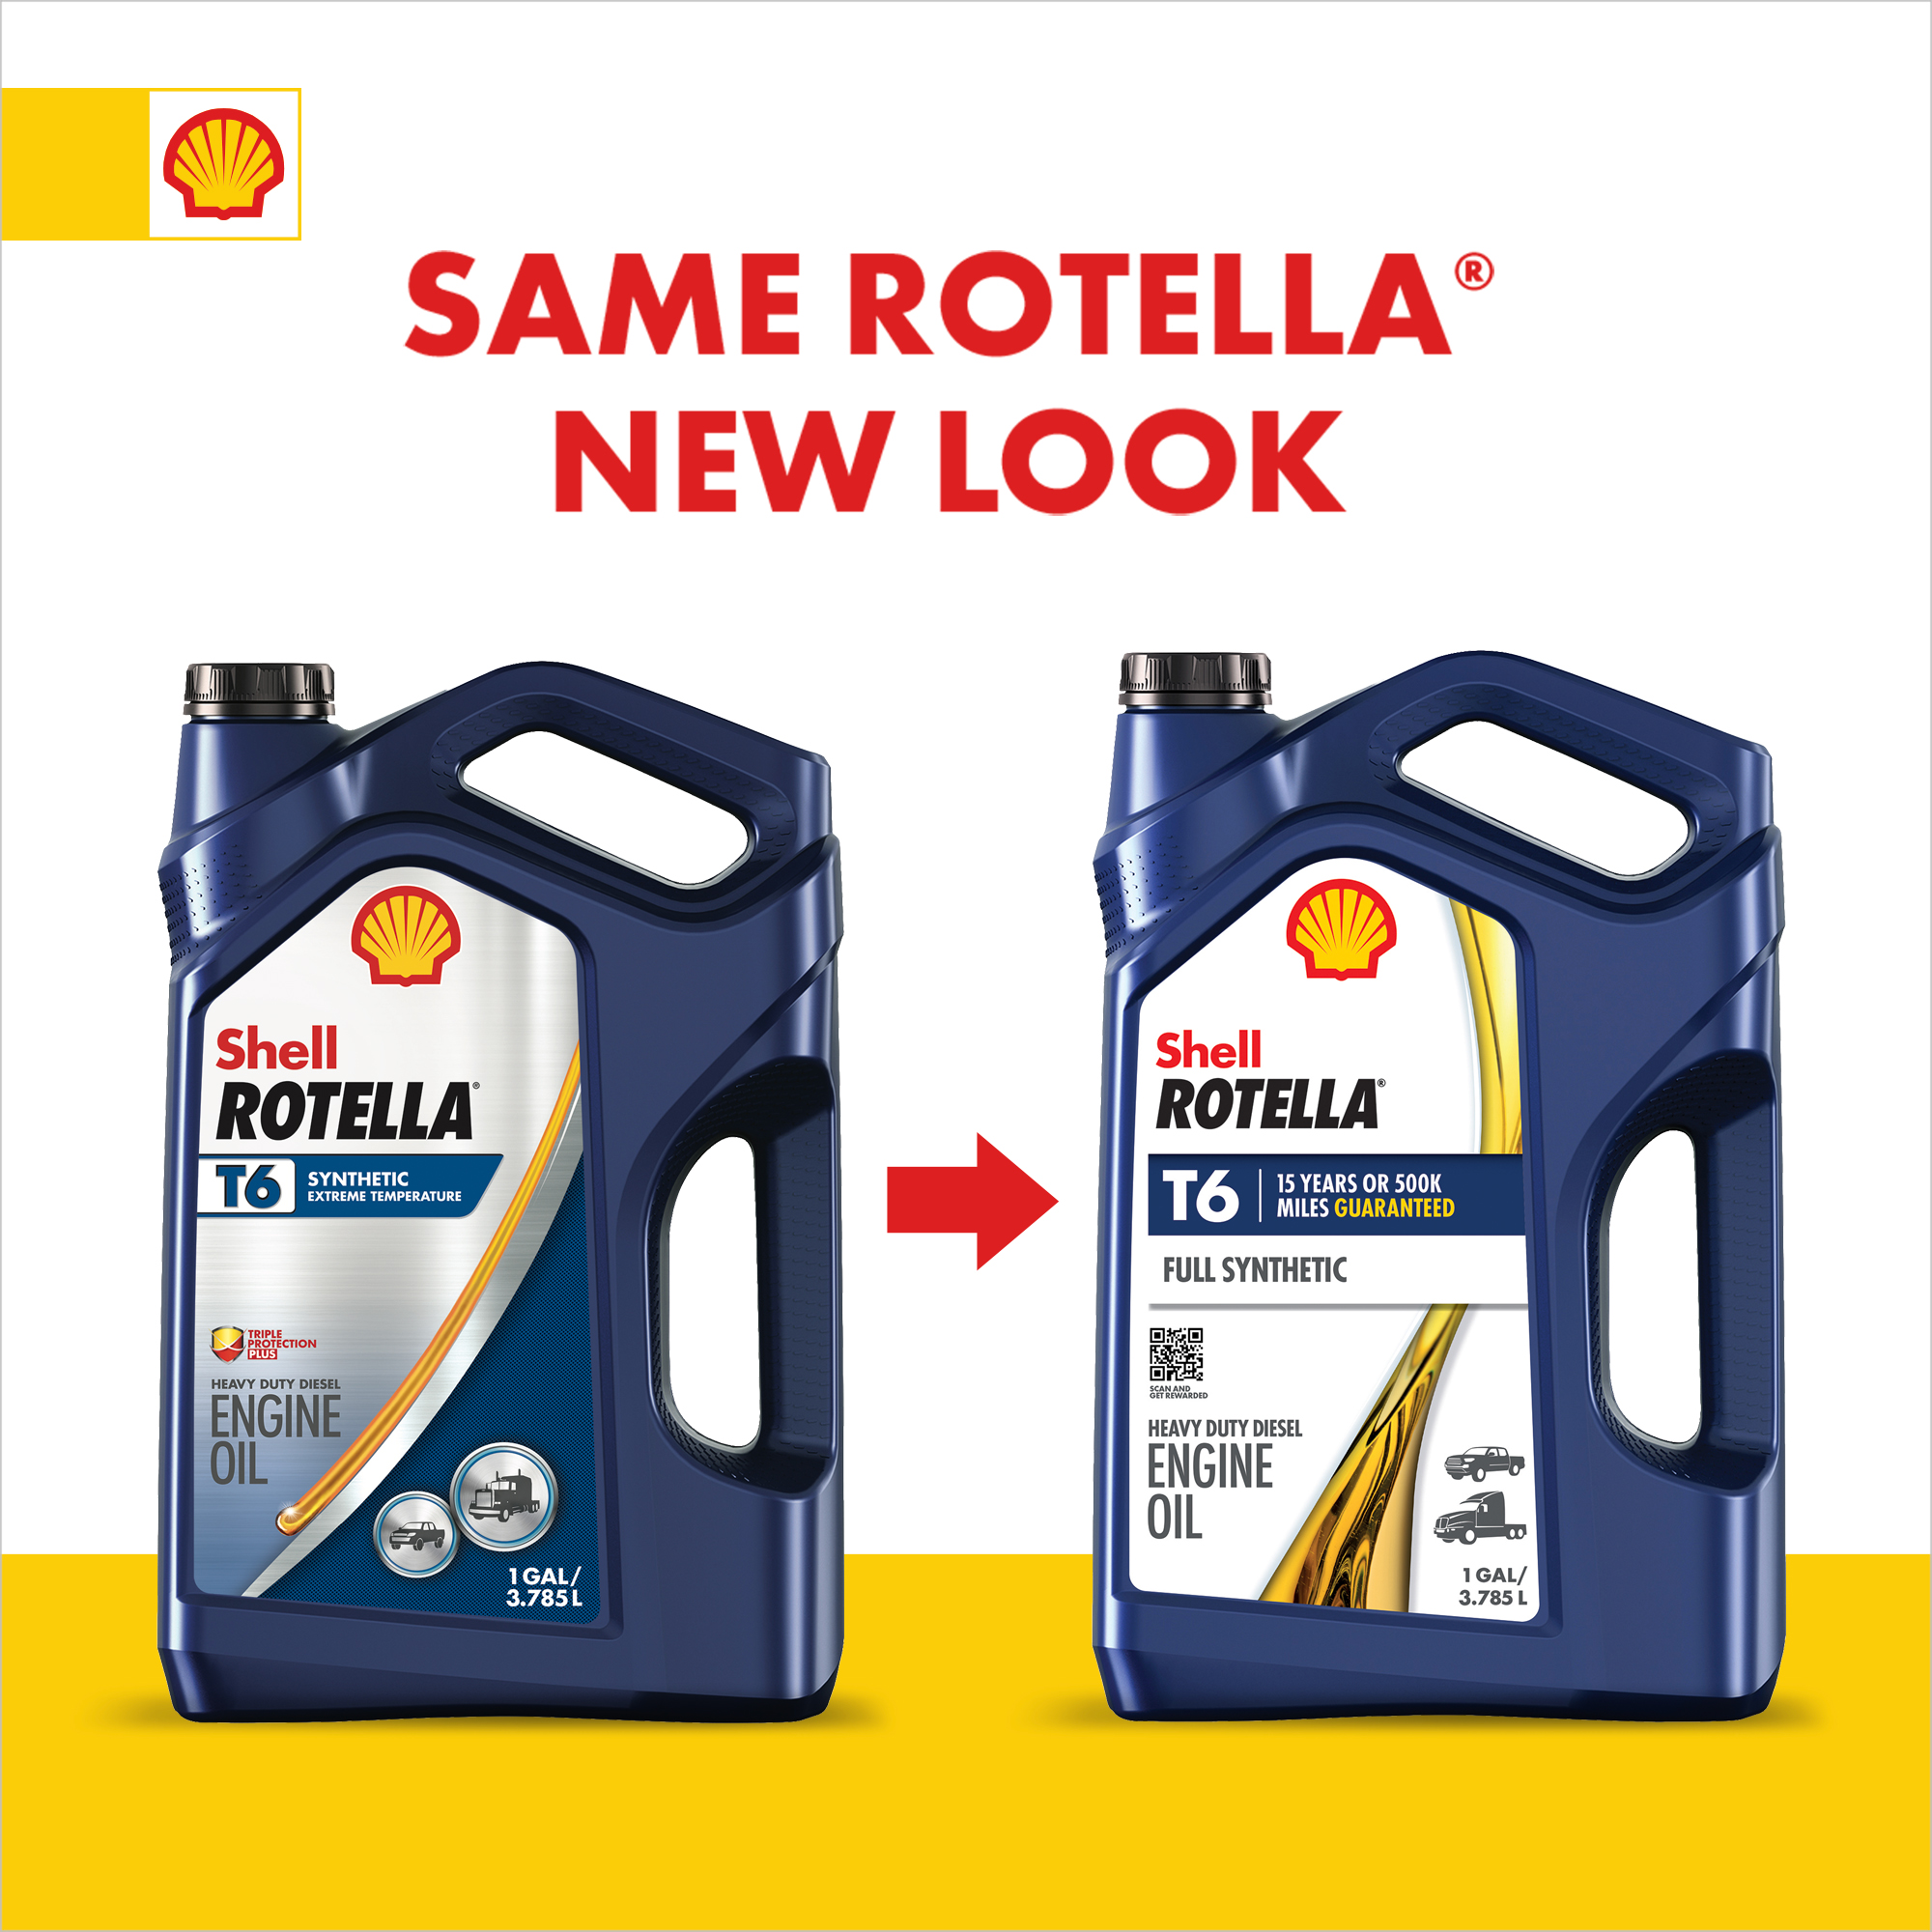 Shell Rotella T6 Full Synthetic 15W-40 Diesel Engine Oil, 1 Gallon - image 4 of 9